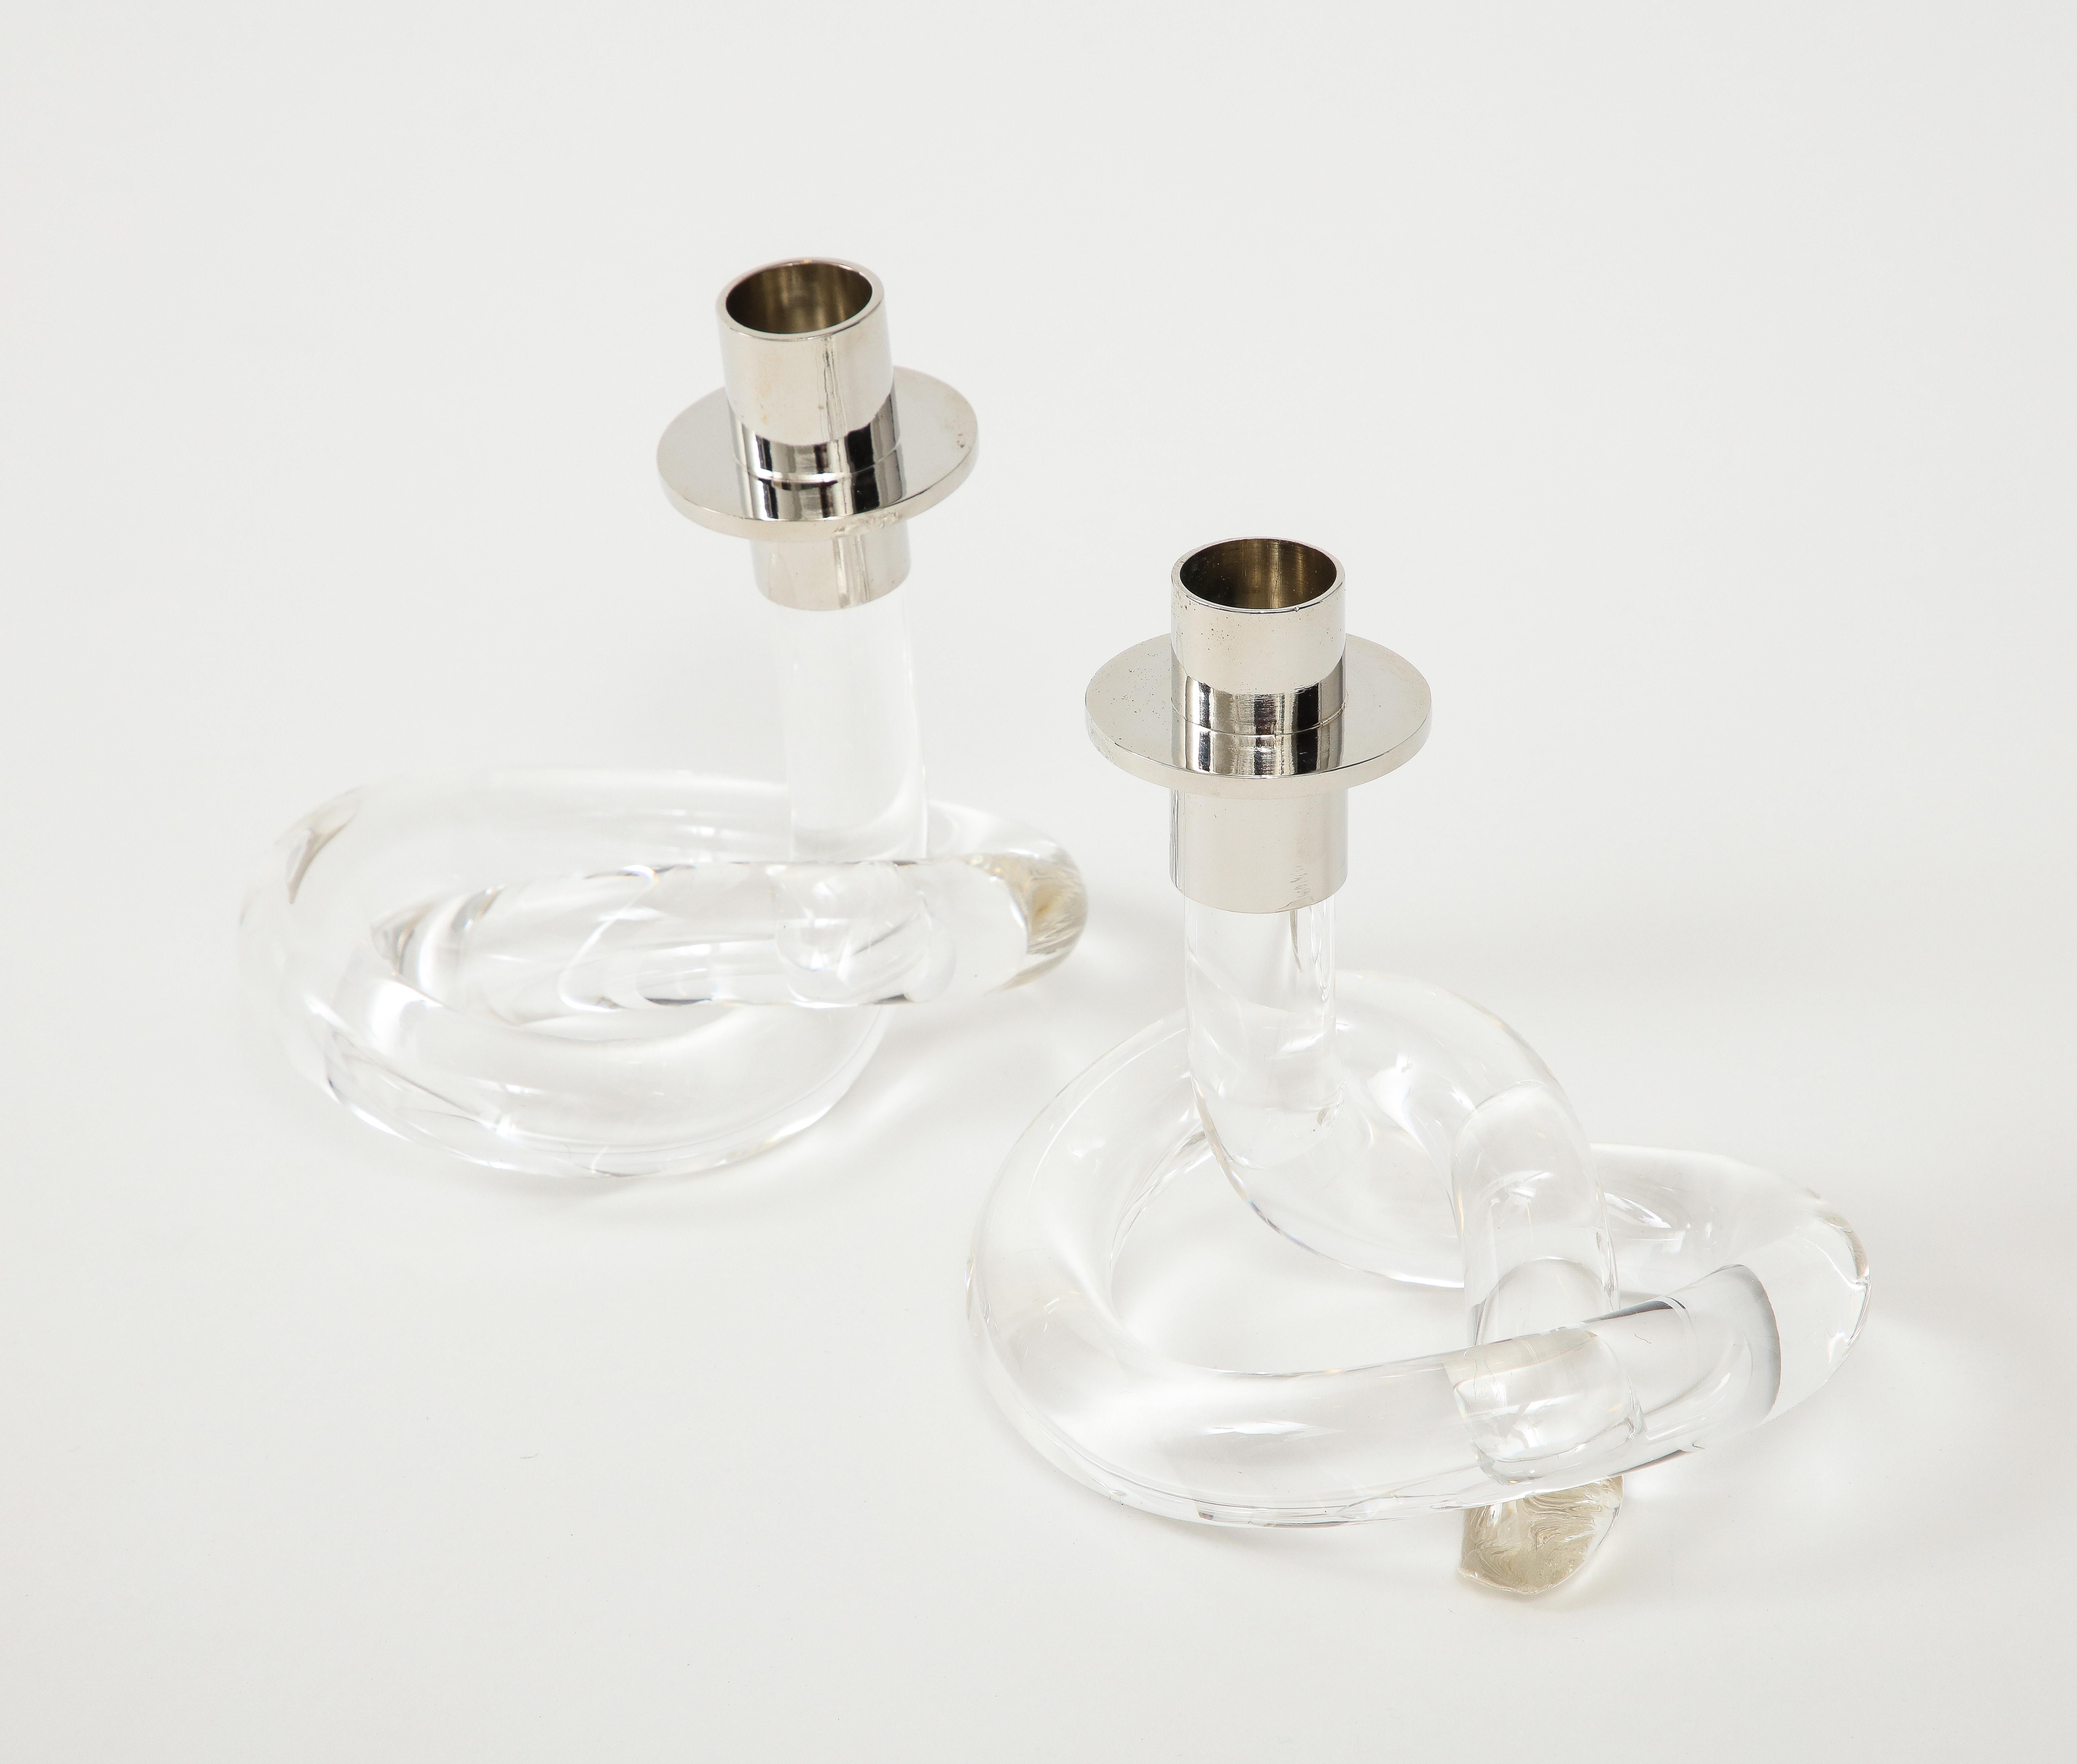 North American Dorothy Thorpe Lucite Knot Candlesticks For Sale